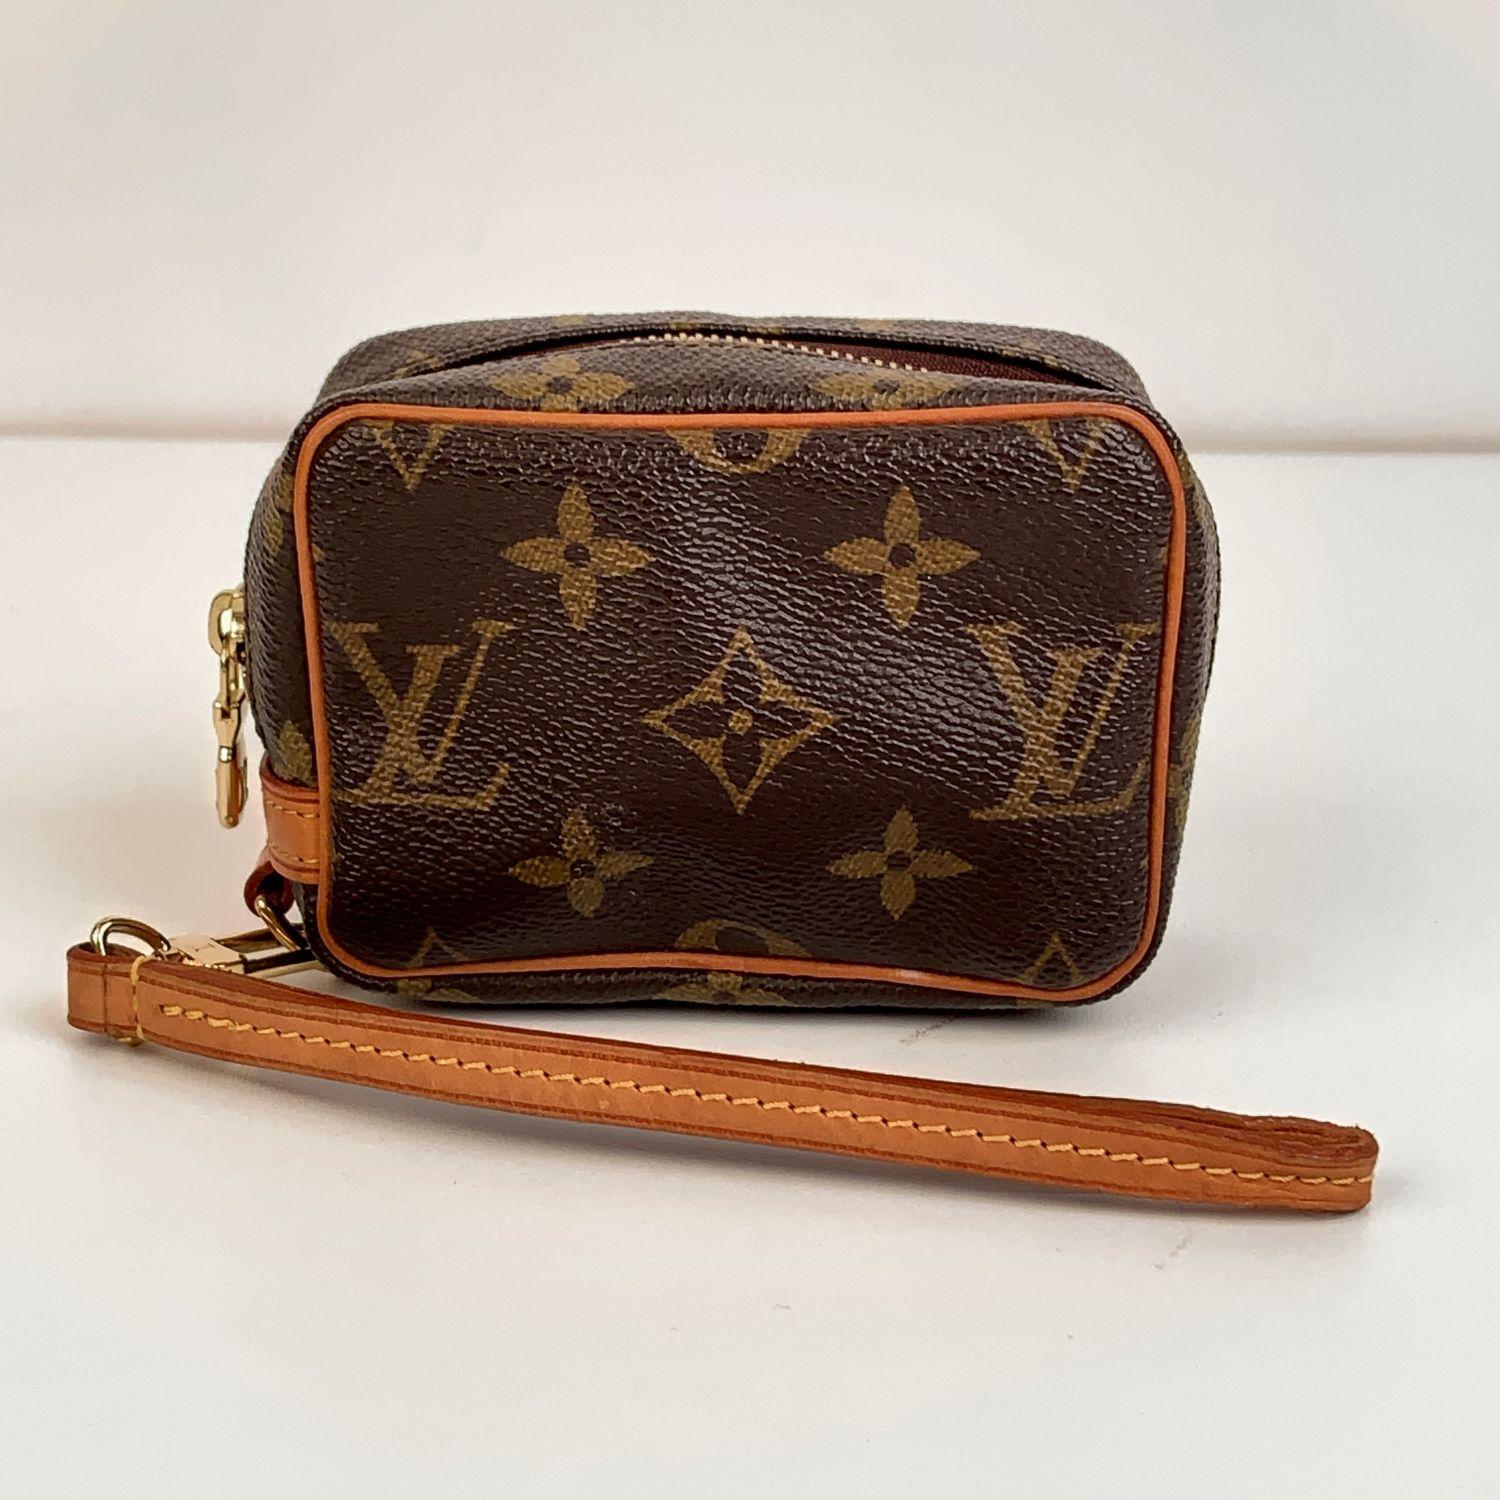 Louis Vuitton Monogram Canvas Trousse Wapity Mini multifunctional pouch. Monogram canvas with natural cowhide leather trim. Golden brass hardware. Leather wrist strap. Red microfiber lining. 'Louis Vuitton Paris - Made in France' embossed inside.